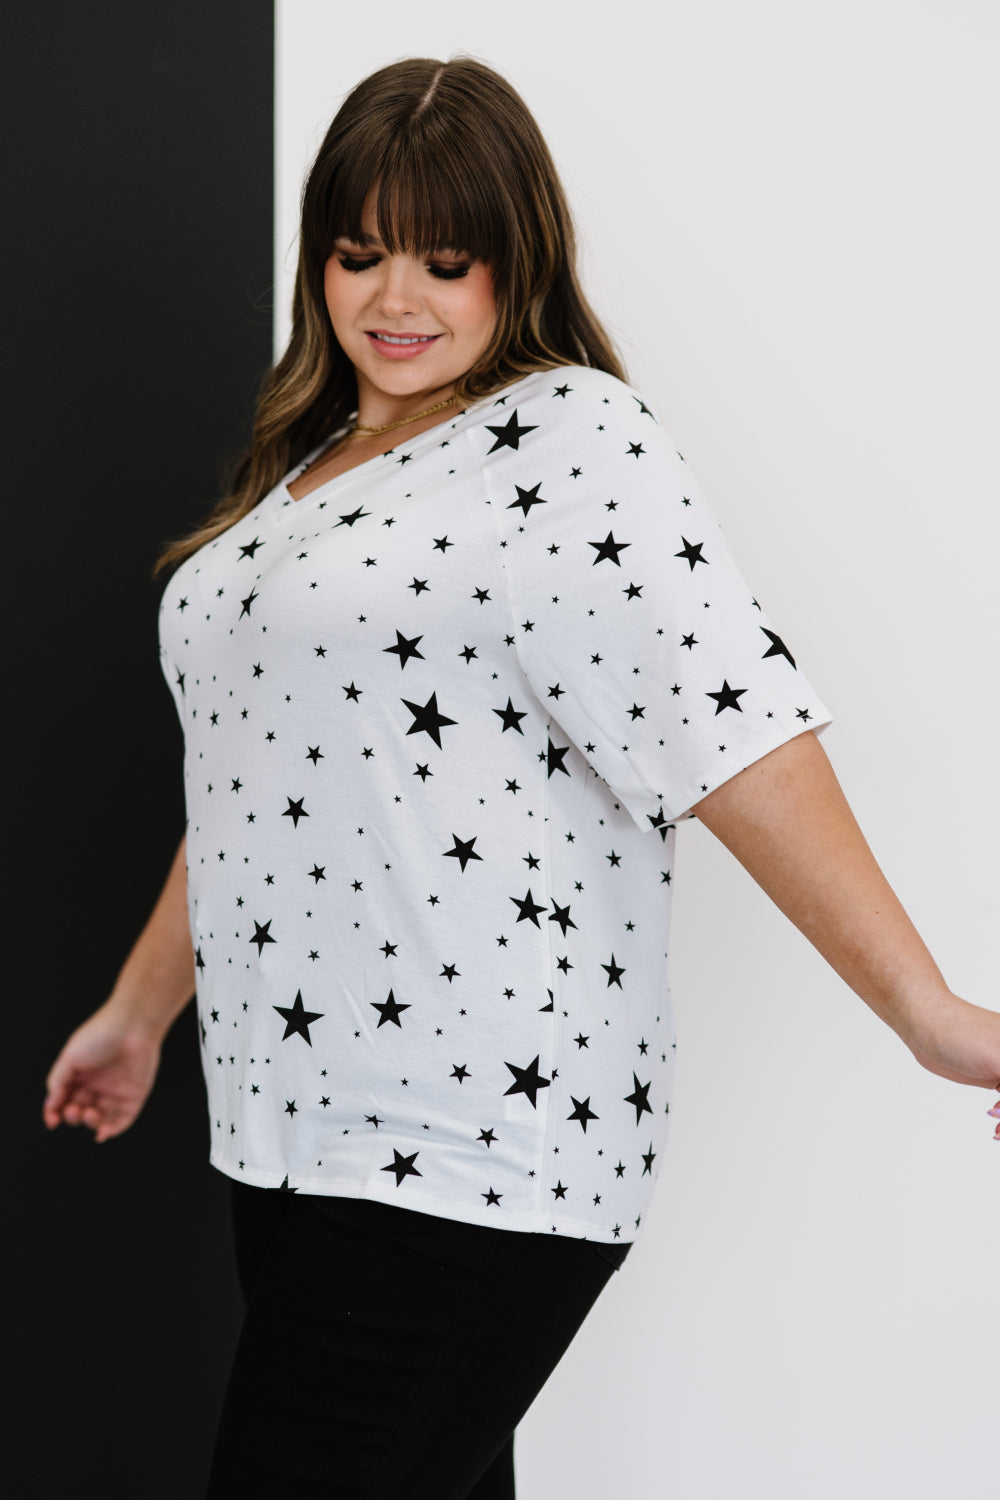 Zenana Made of Stars Tee in Ivory and Black